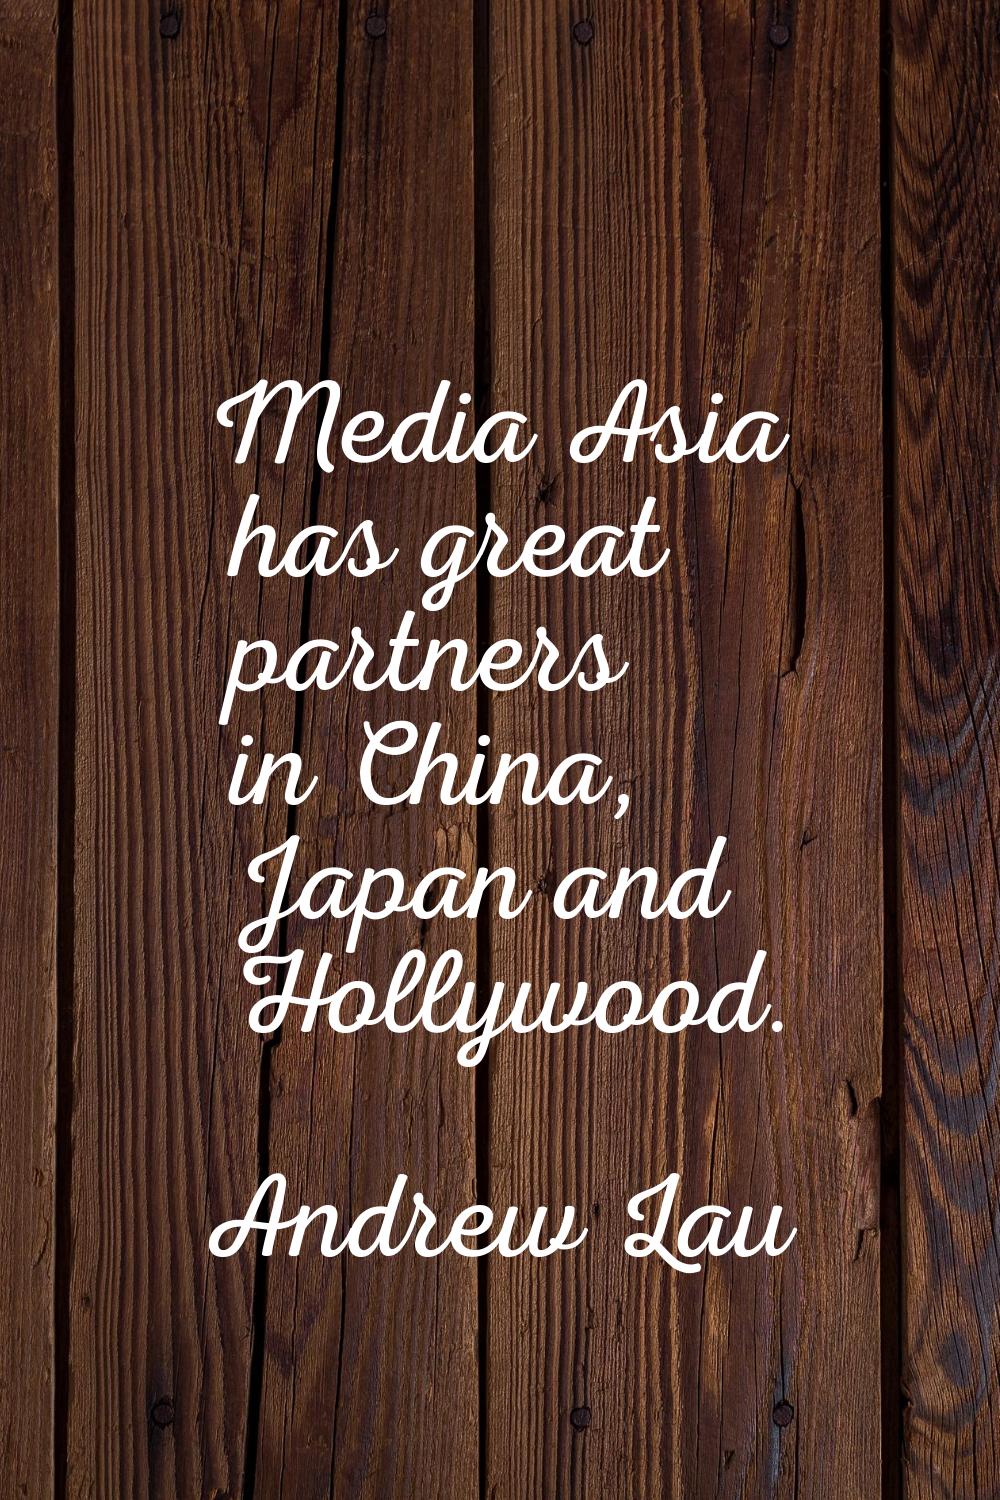 Media Asia has great partners in China, Japan and Hollywood.